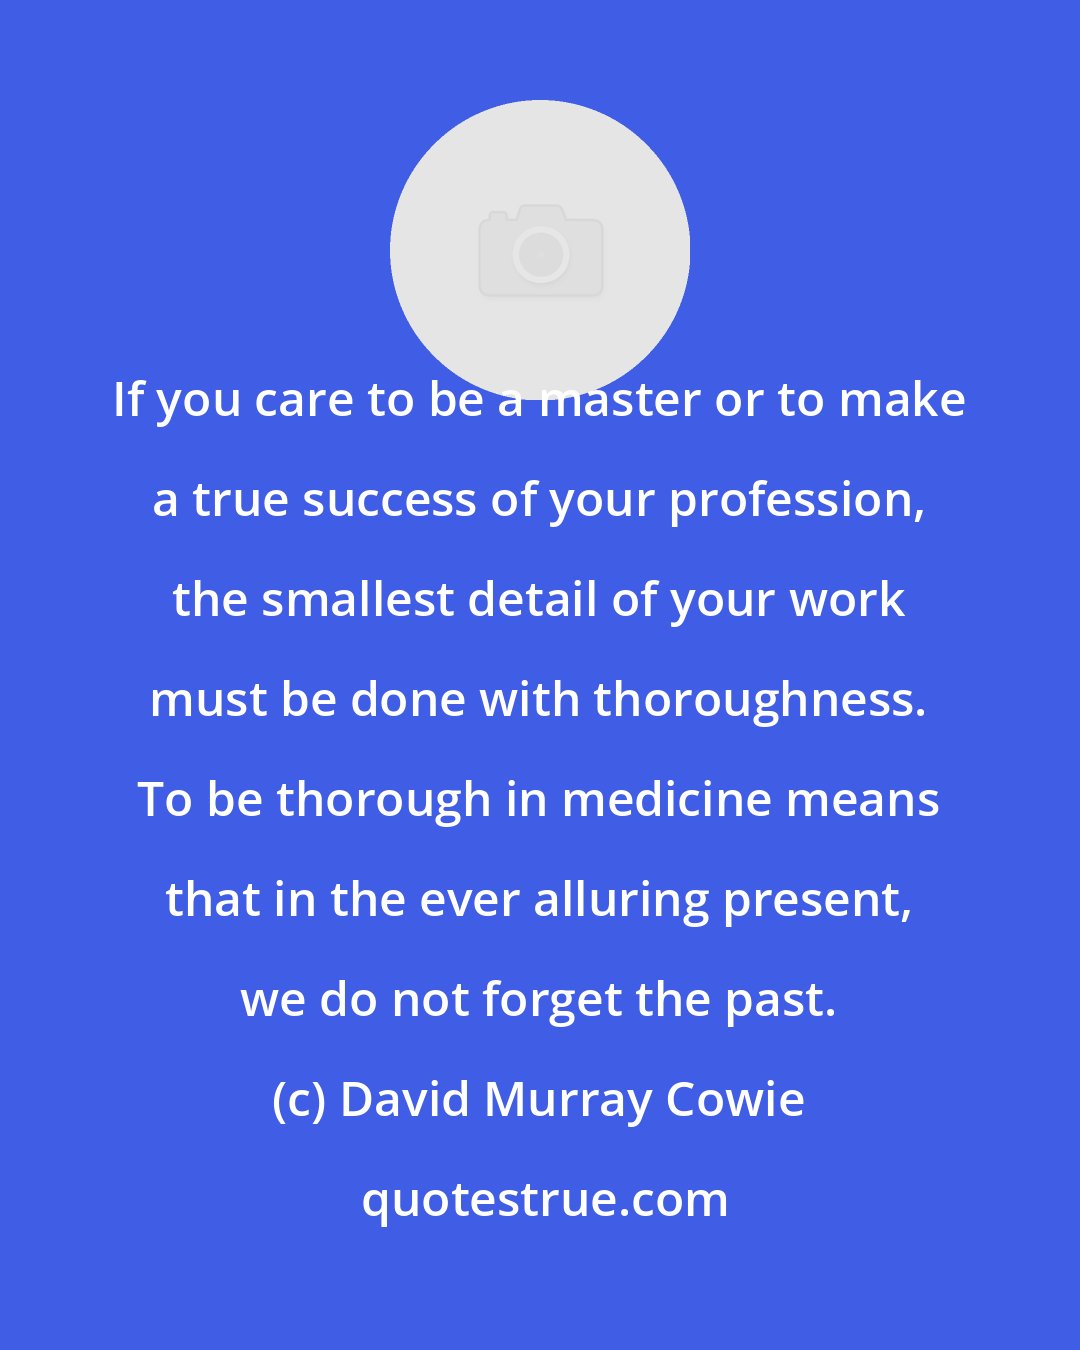 David Murray Cowie: If you care to be a master or to make a true success of your profession, the smallest detail of your work must be done with thoroughness. To be thorough in medicine means that in the ever alluring present, we do not forget the past.